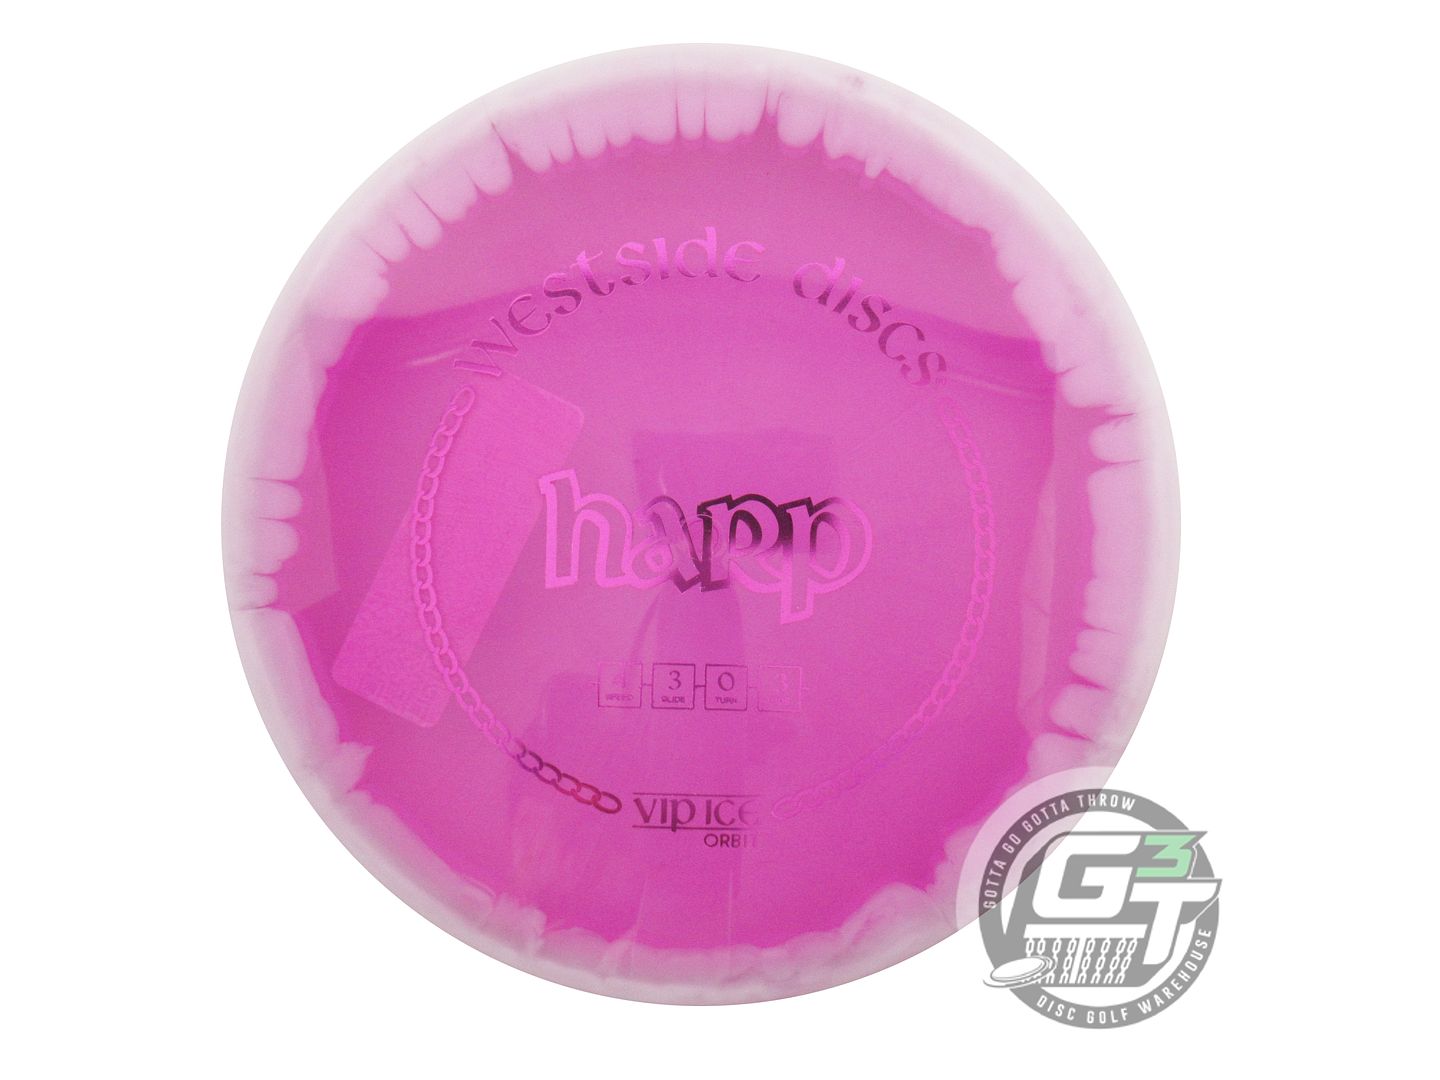 Westside VIP Ice Orbit Harp Putter Golf Disc (Individually Listed)